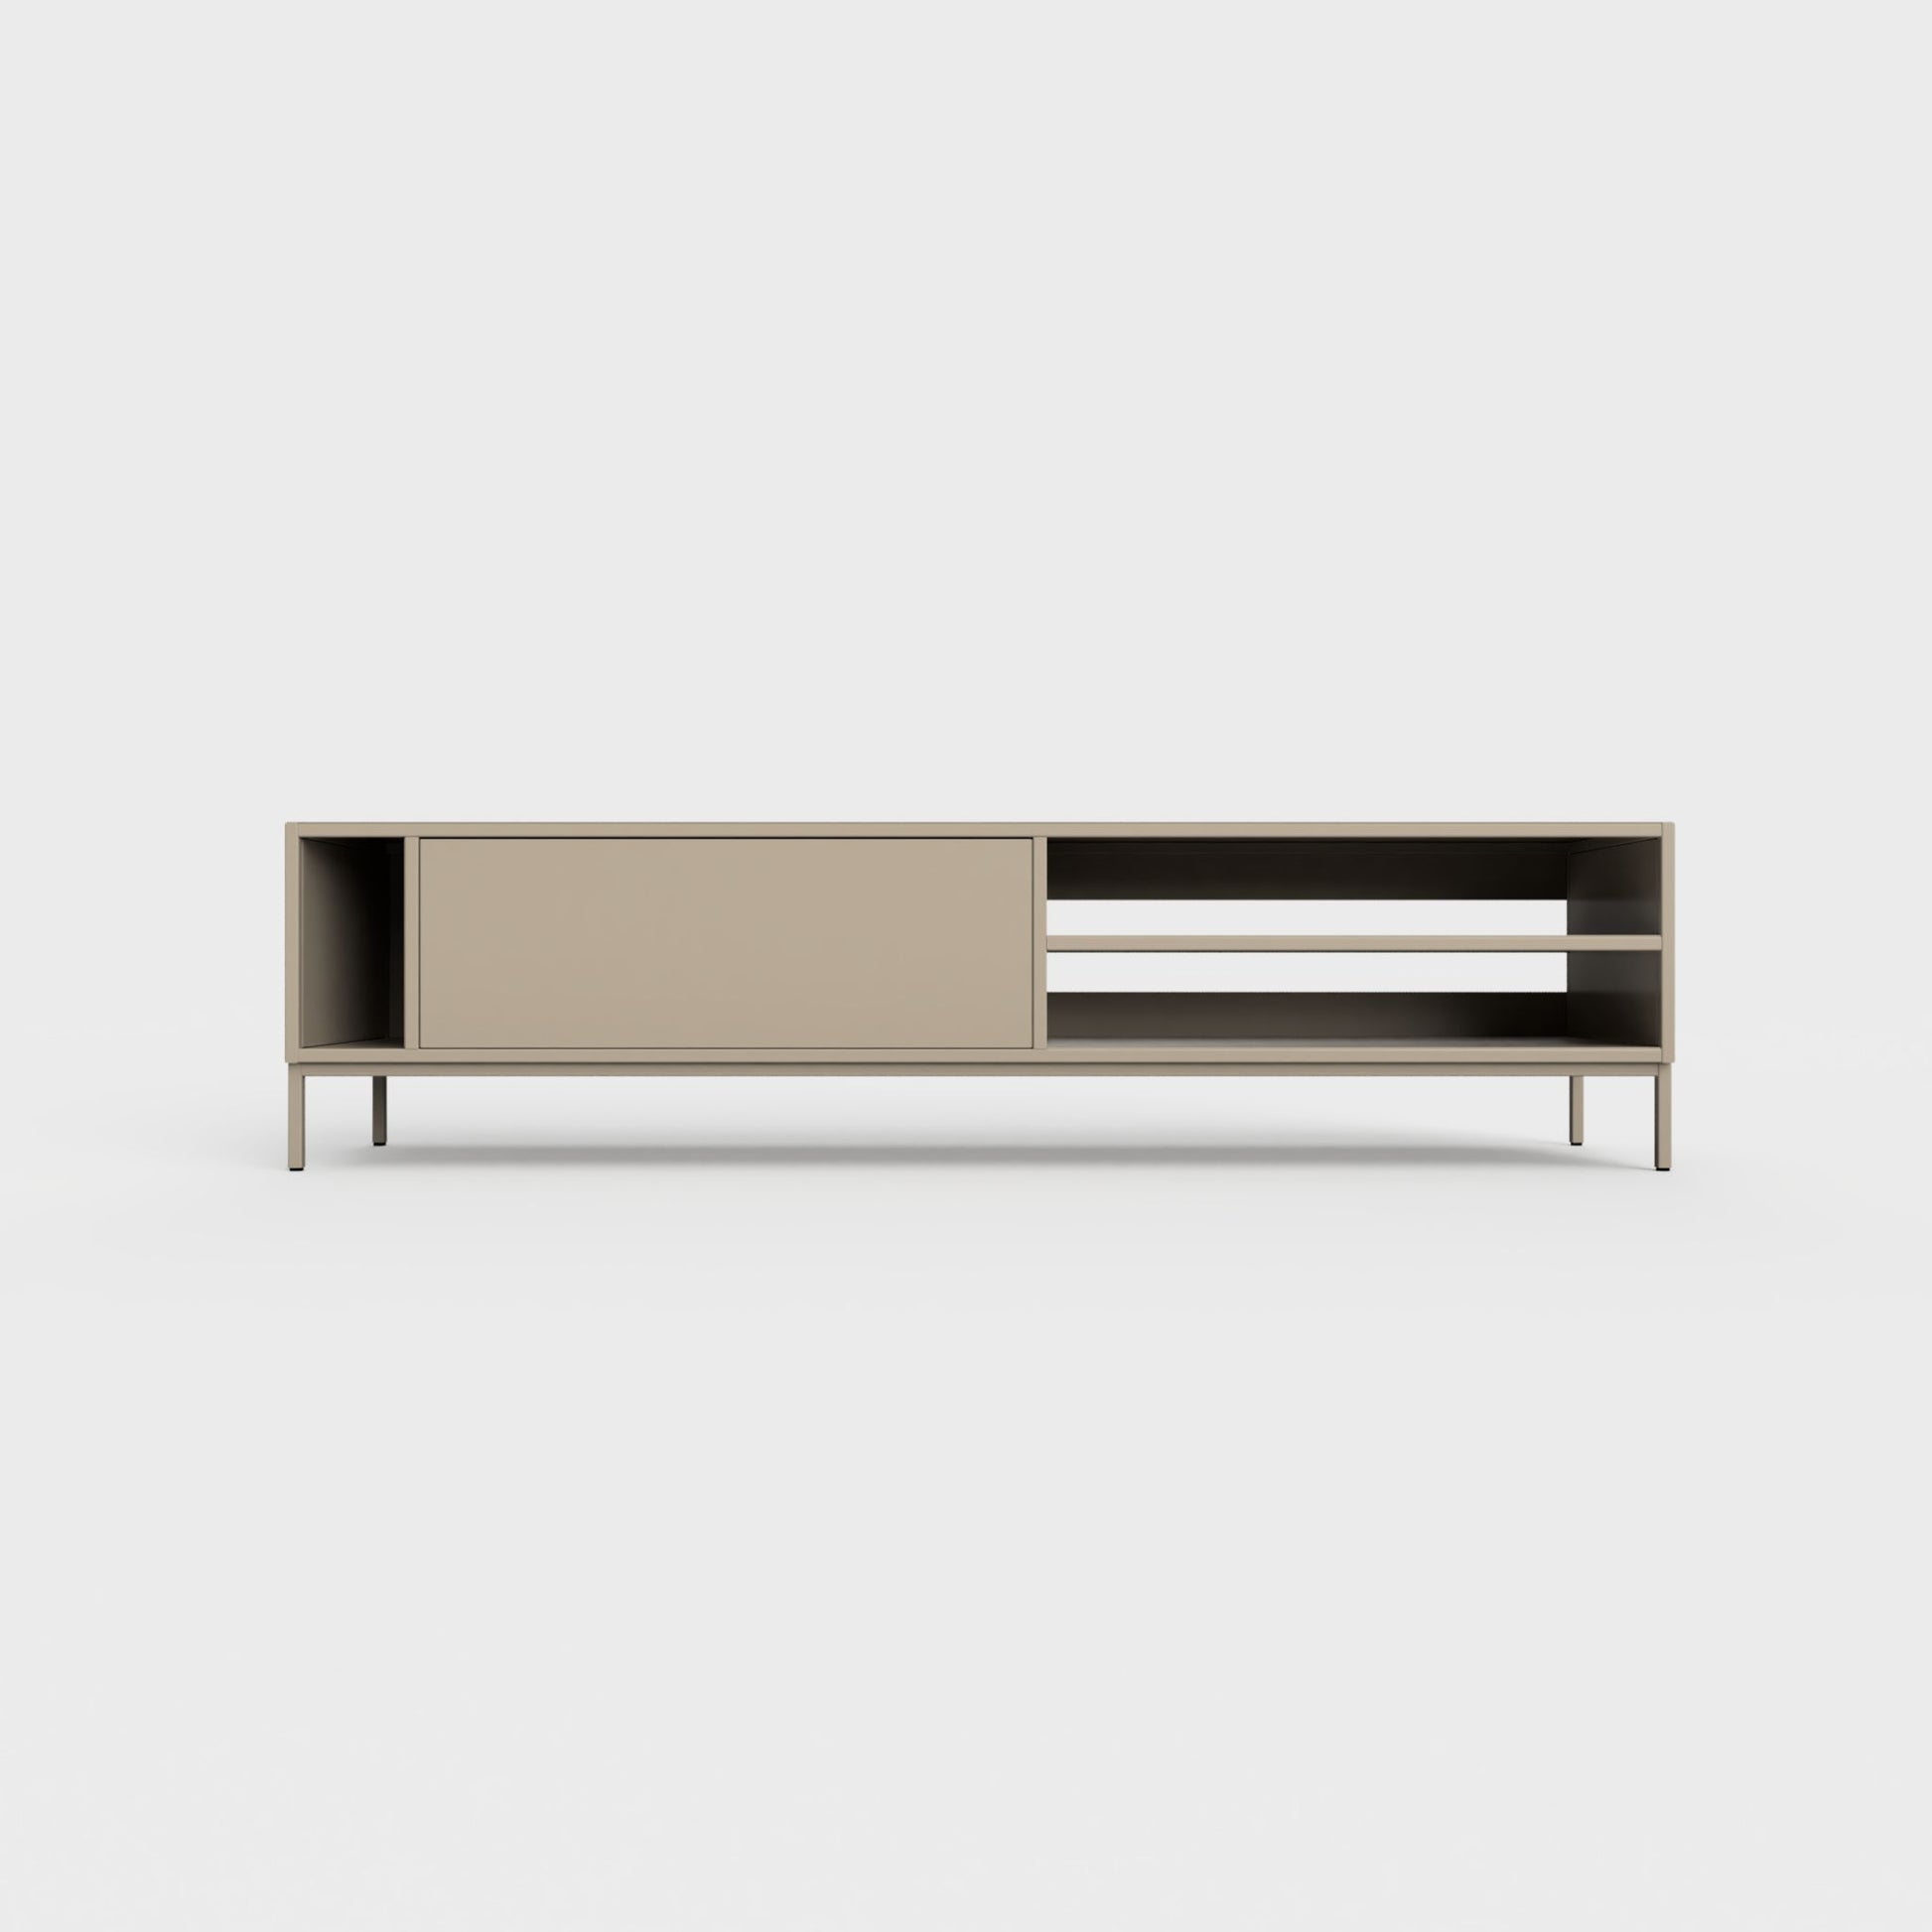 Prunus 03 Lowboard in cold beige, powder-coated steel, elegant and modern piece of furniture for your living room